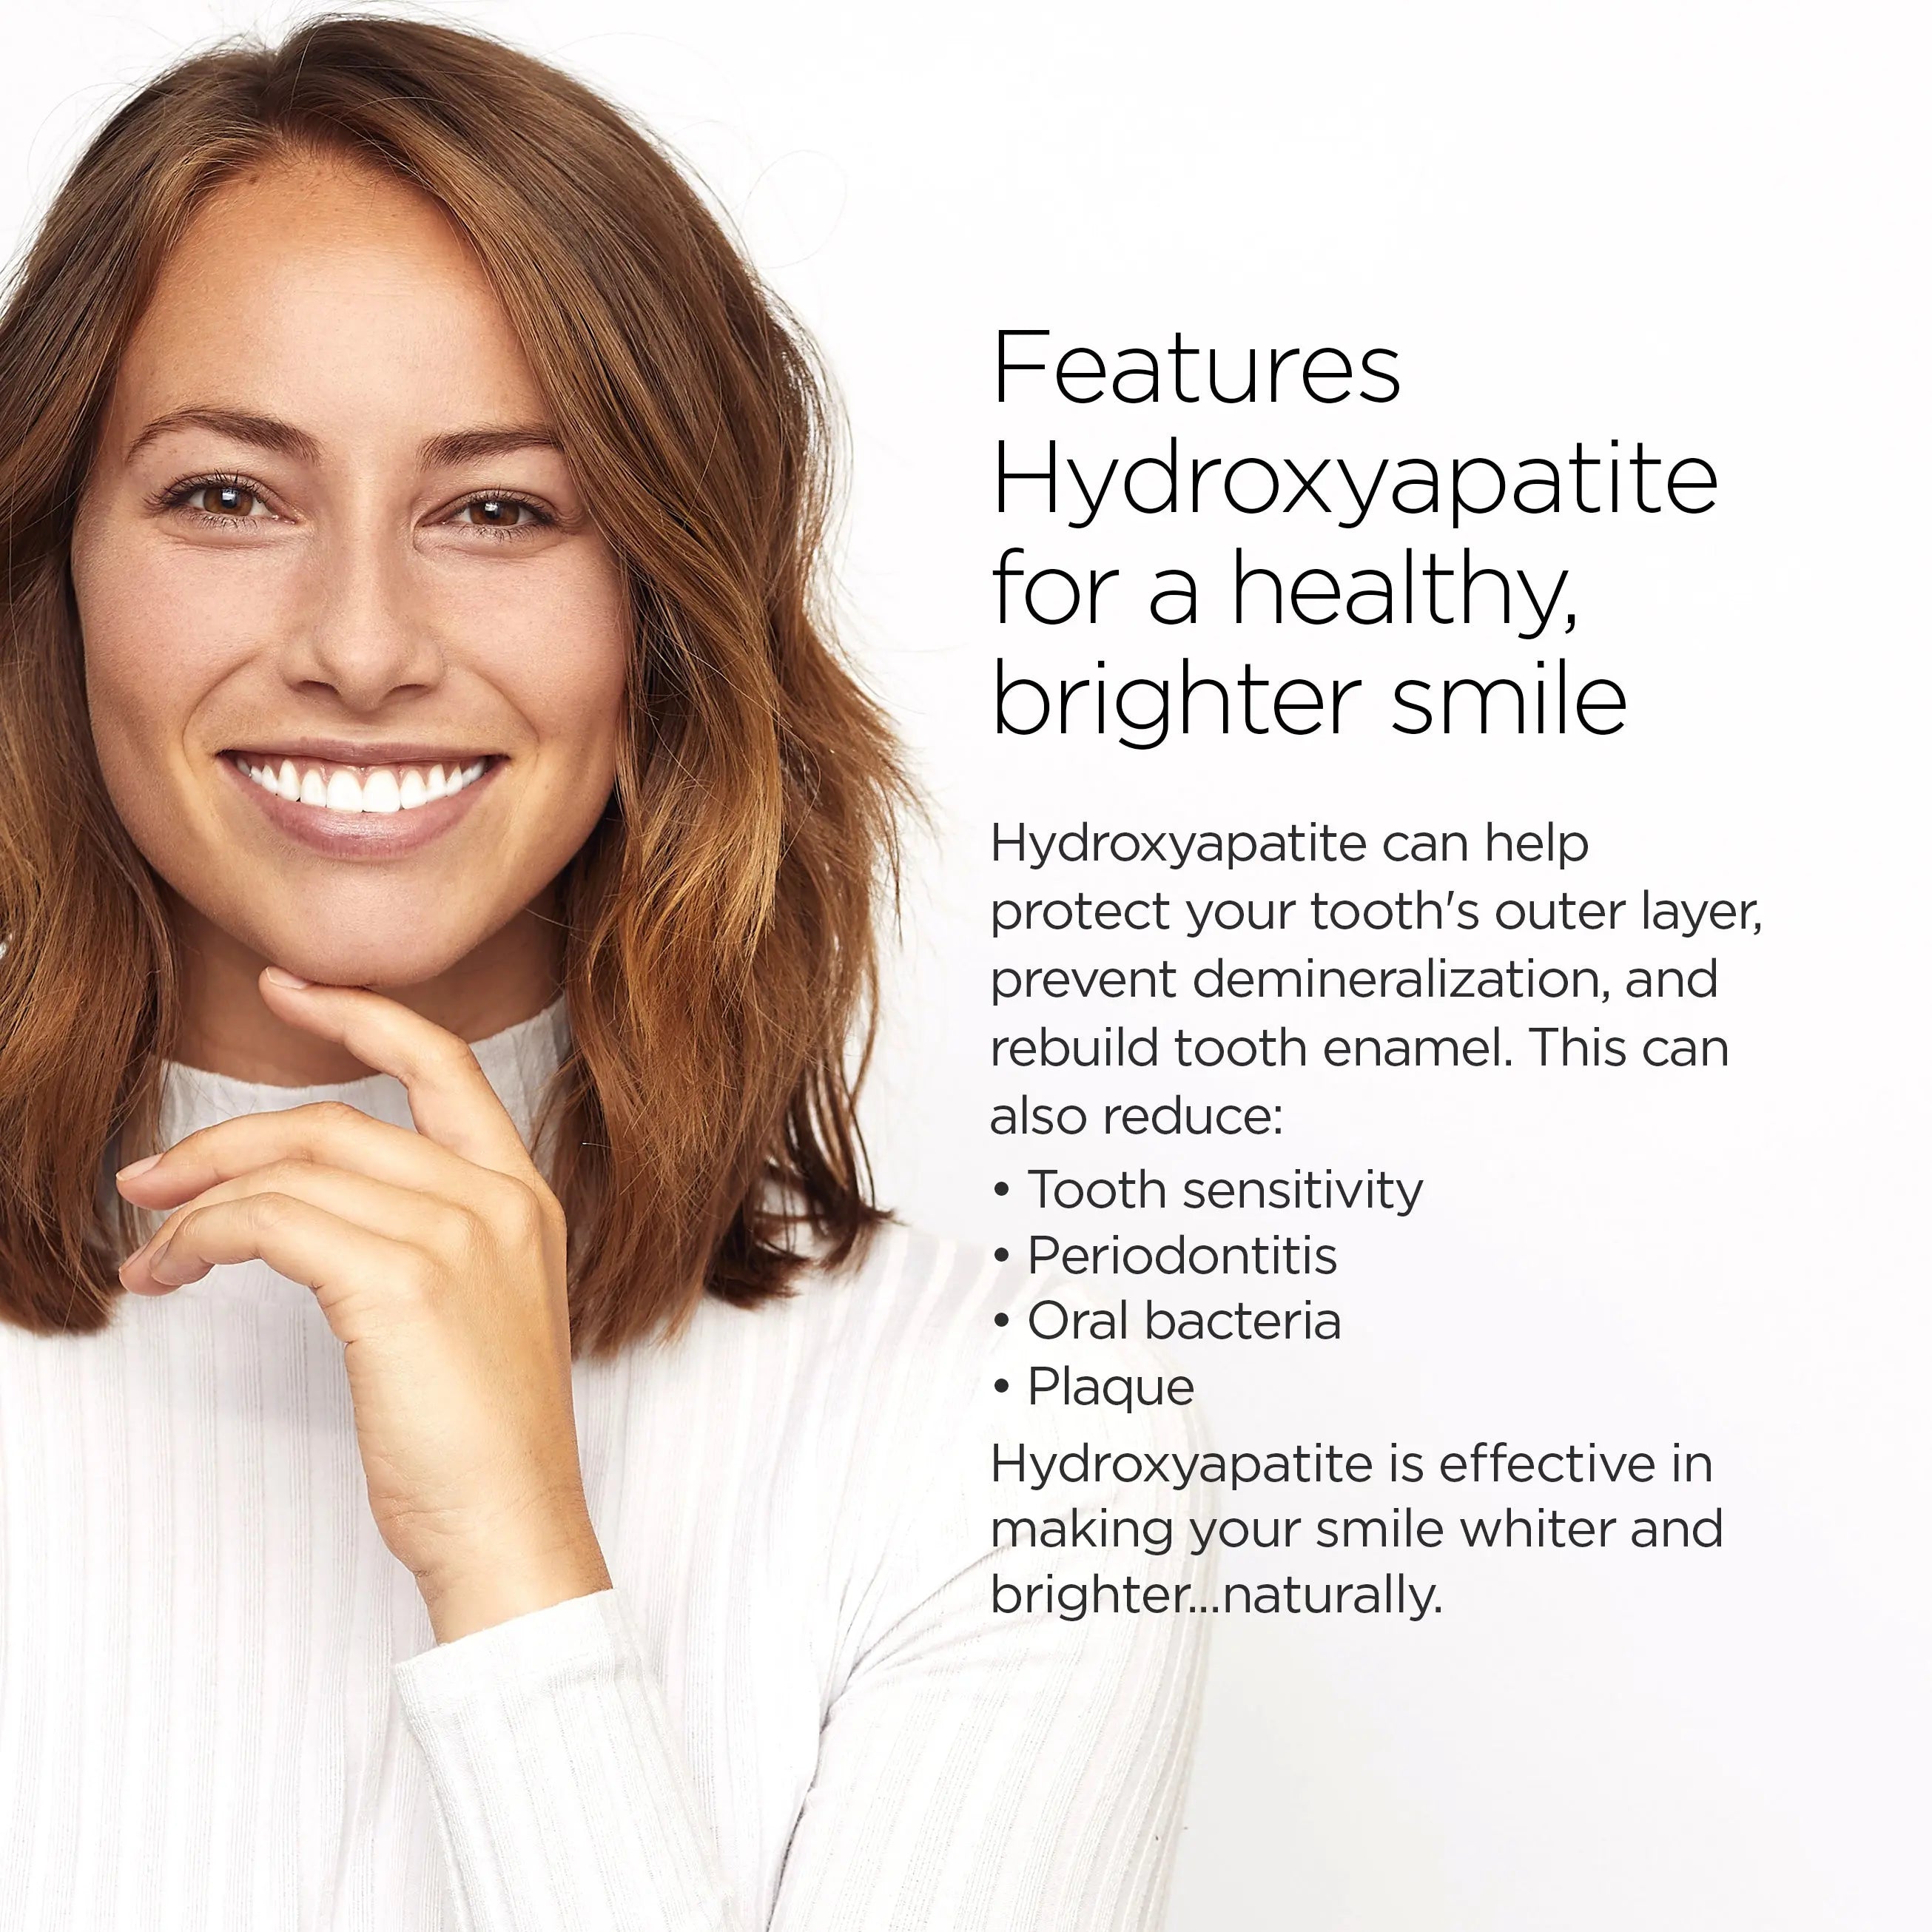 Fluoride Free Organic & Natural Toothpaste with Hydroxyapatite ORL LABS